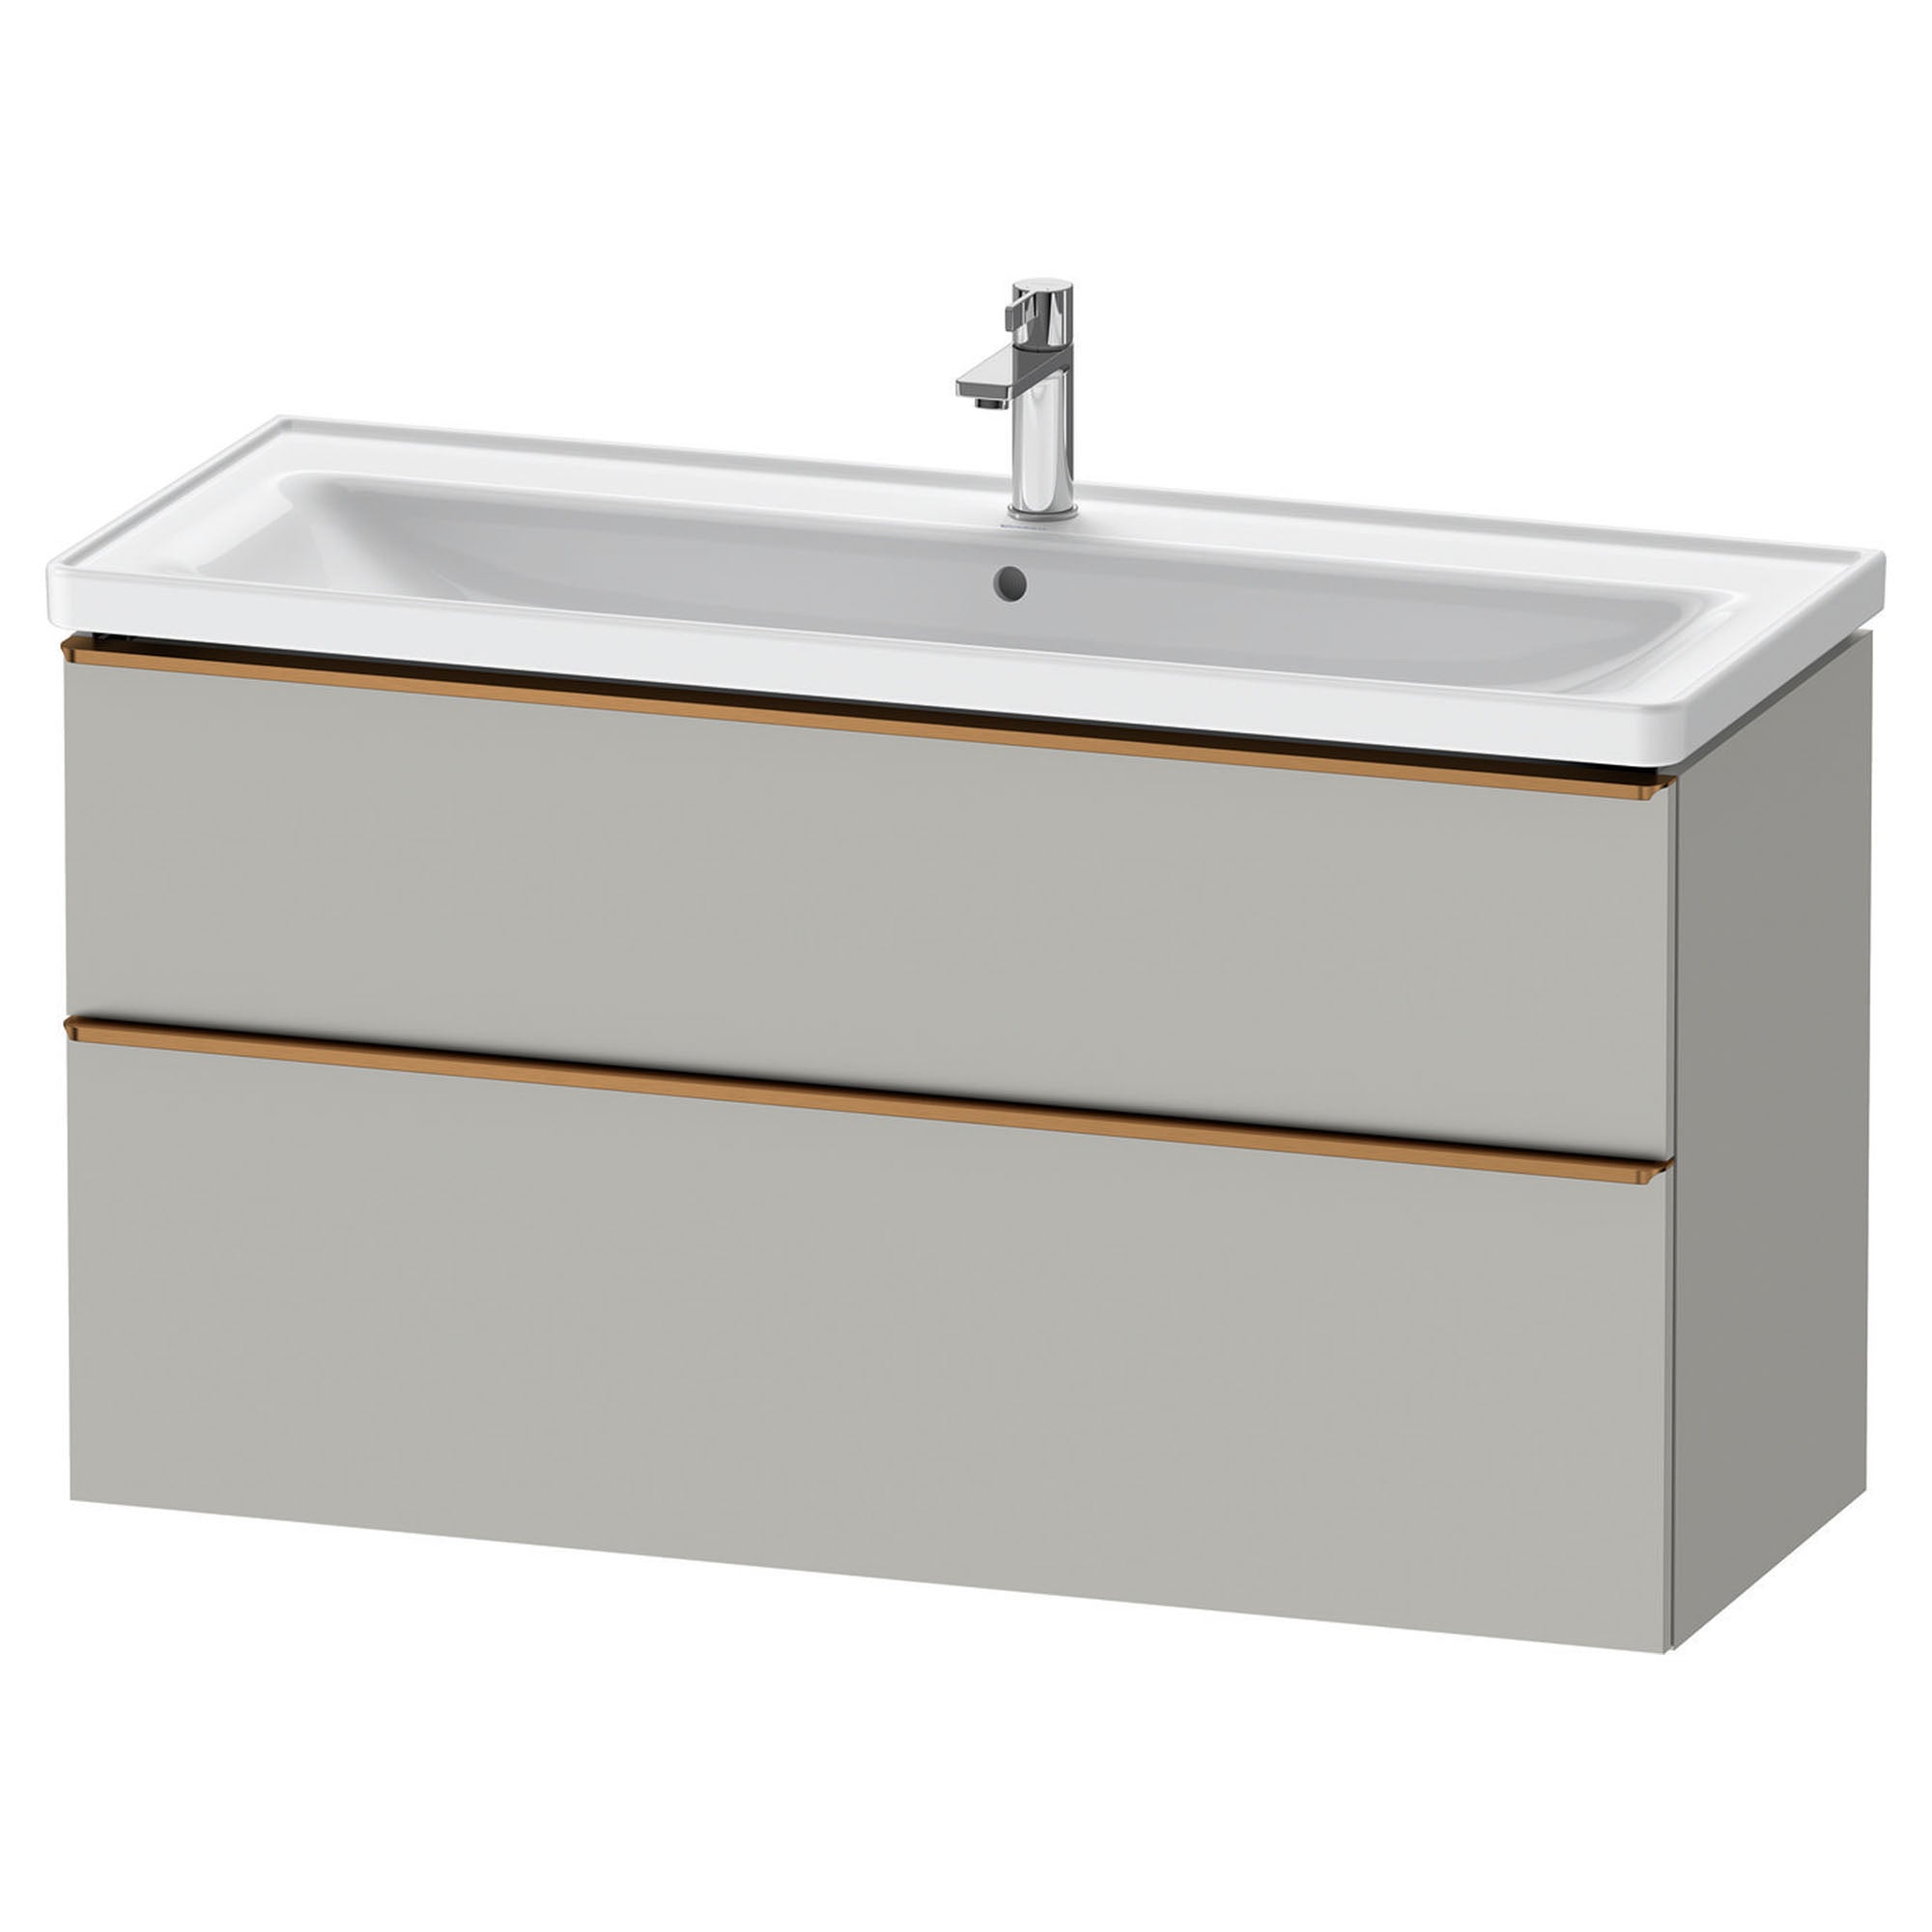 duravit d-neo 1200mm wall mounted vanity unit with d-neo basin concrete grey brushed bronze handles